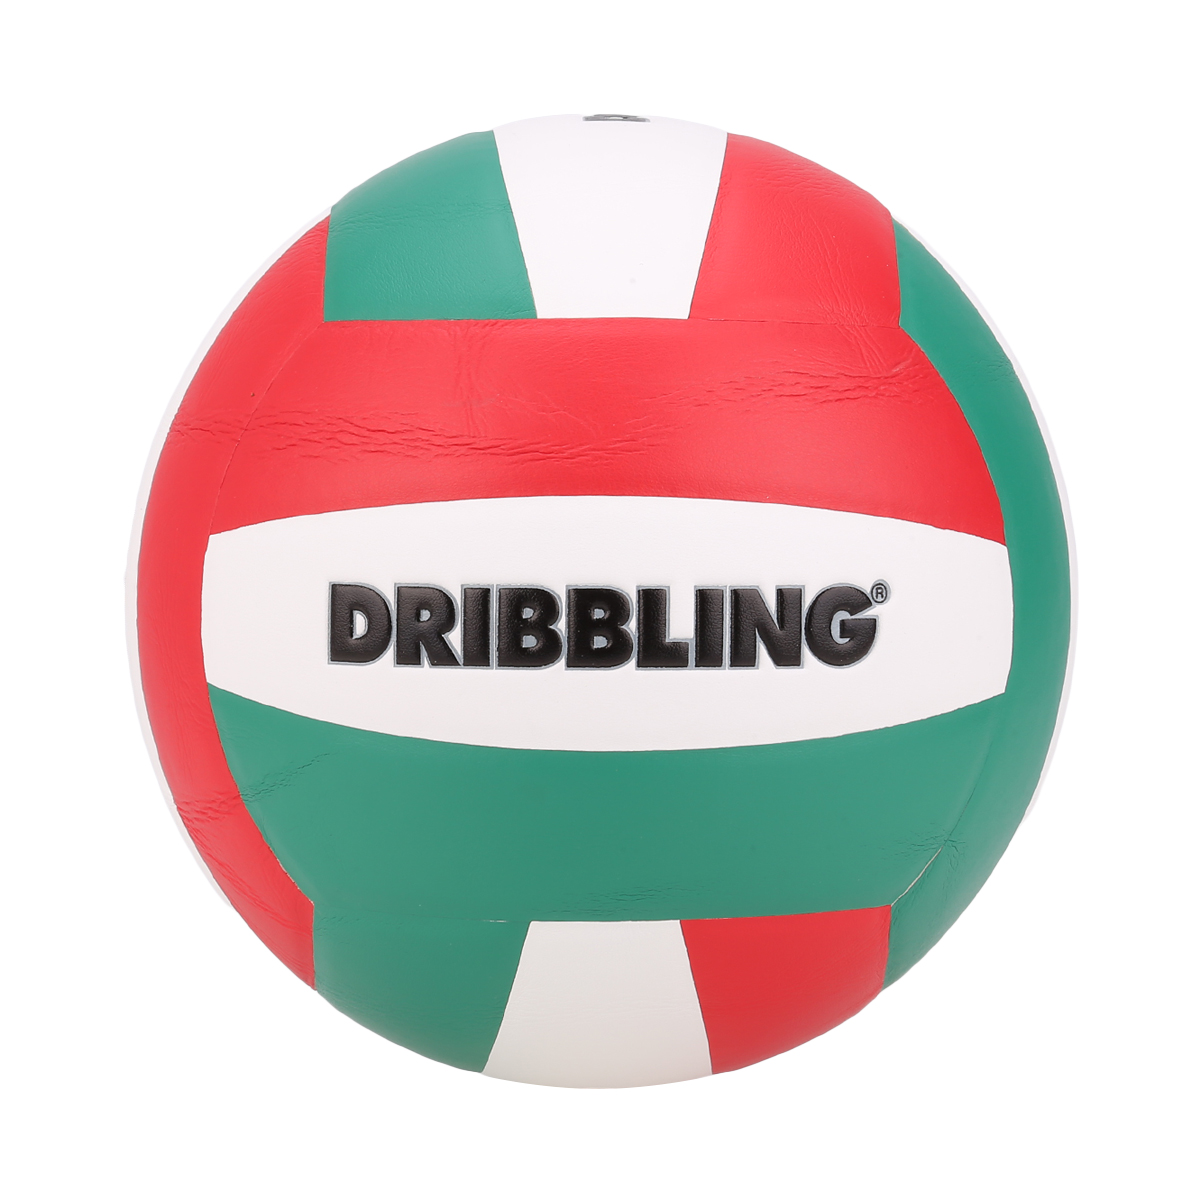 Pelota Dribbling Soft Touch 7.0 Pro,  image number null